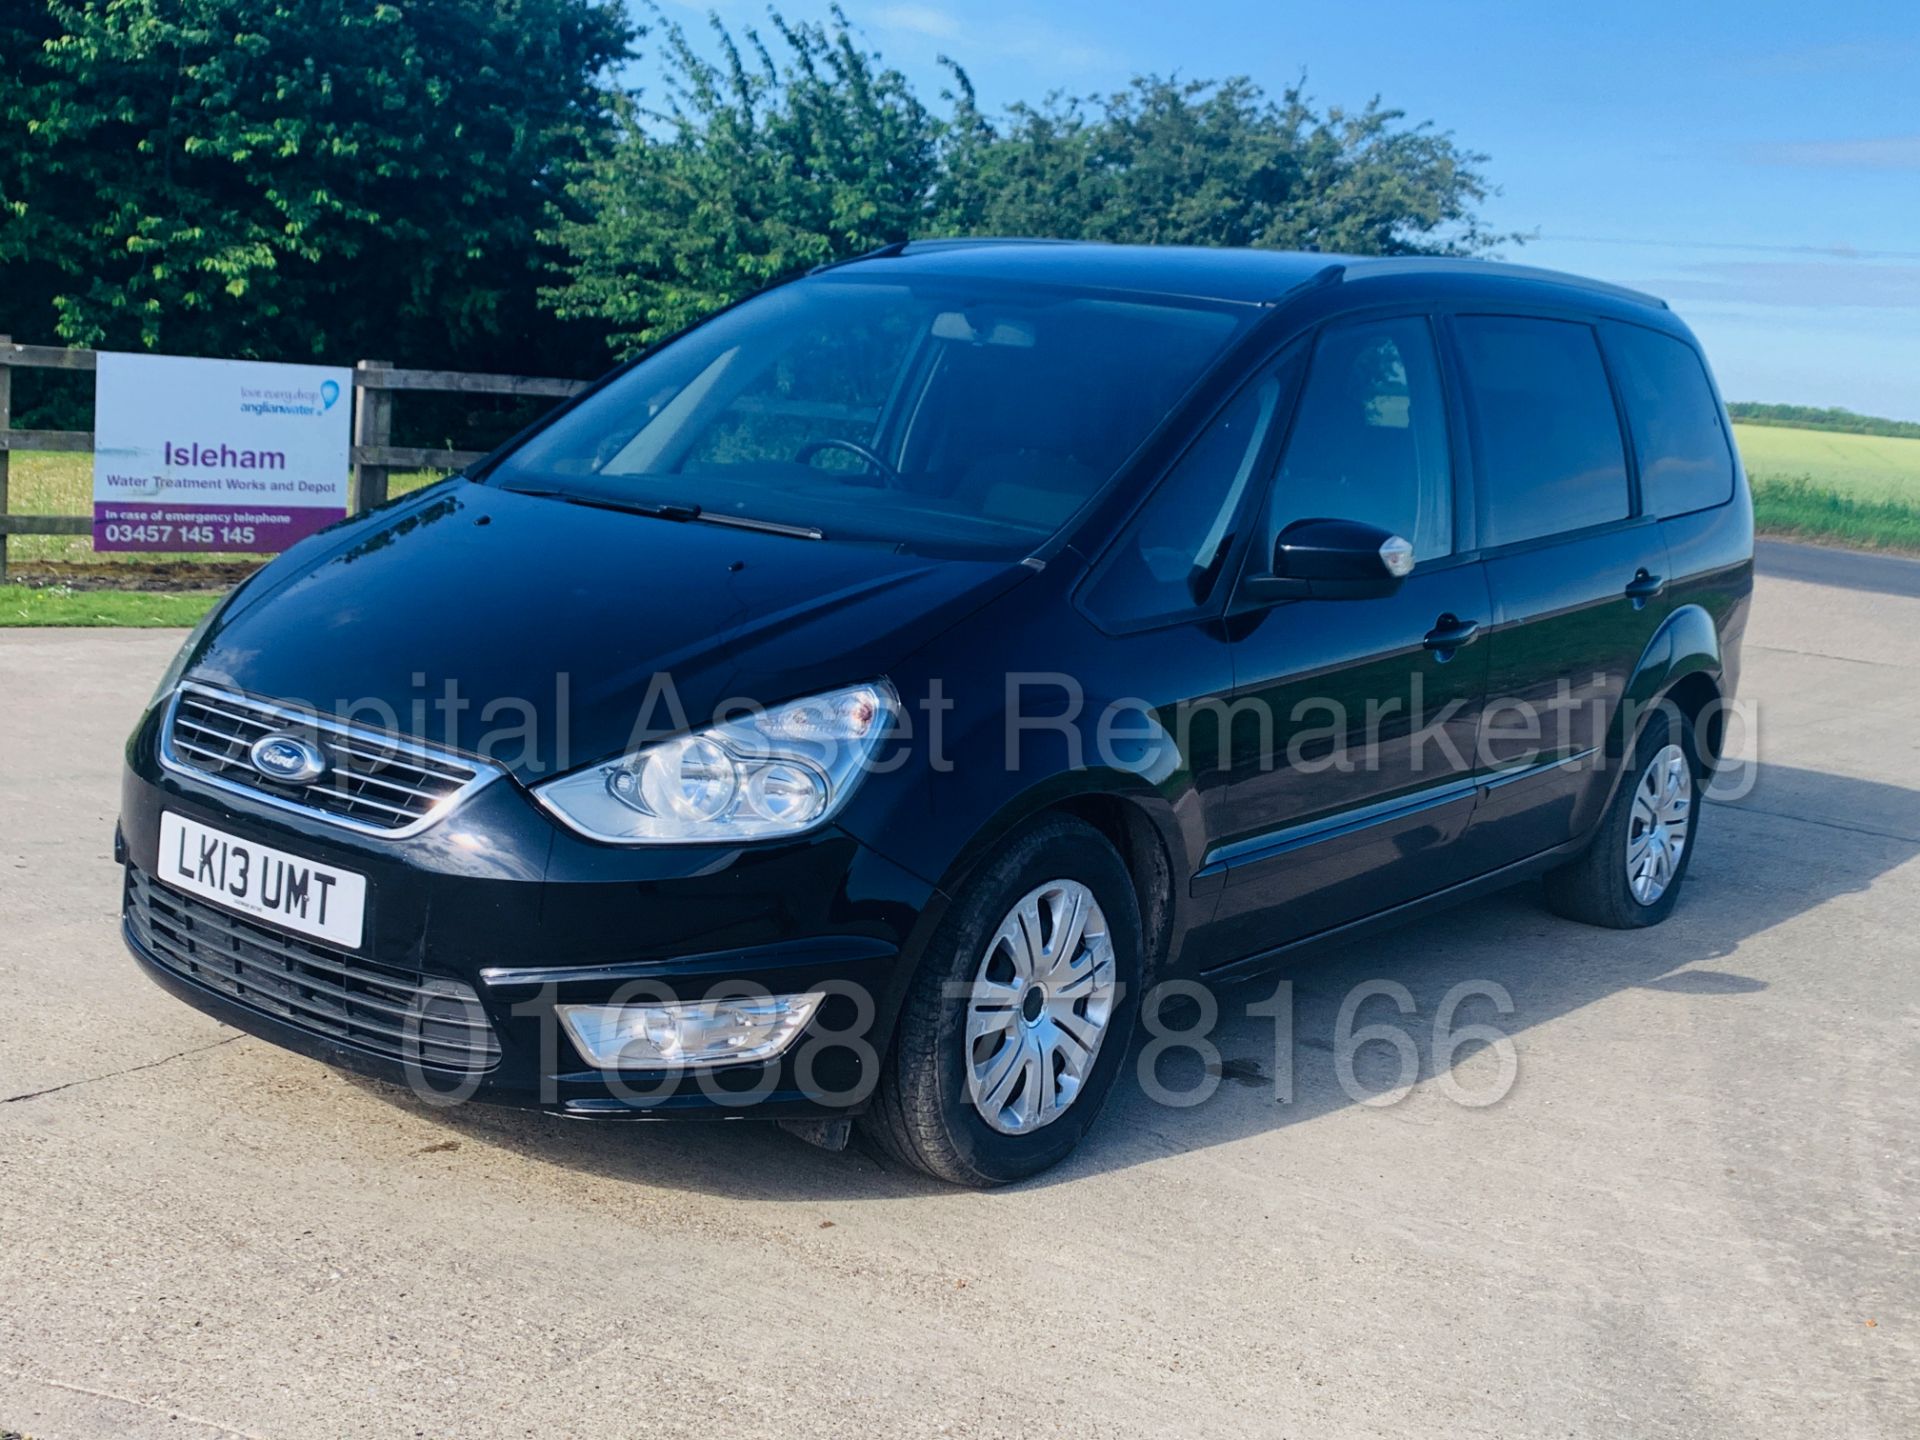 (ON SALE) FORD GALAXY *ZETEC* 7 SEATER MPV (2013) '2.0 TDCI - POWER SHIFT' (NO VAT - SAVE 20%) - Image 2 of 31